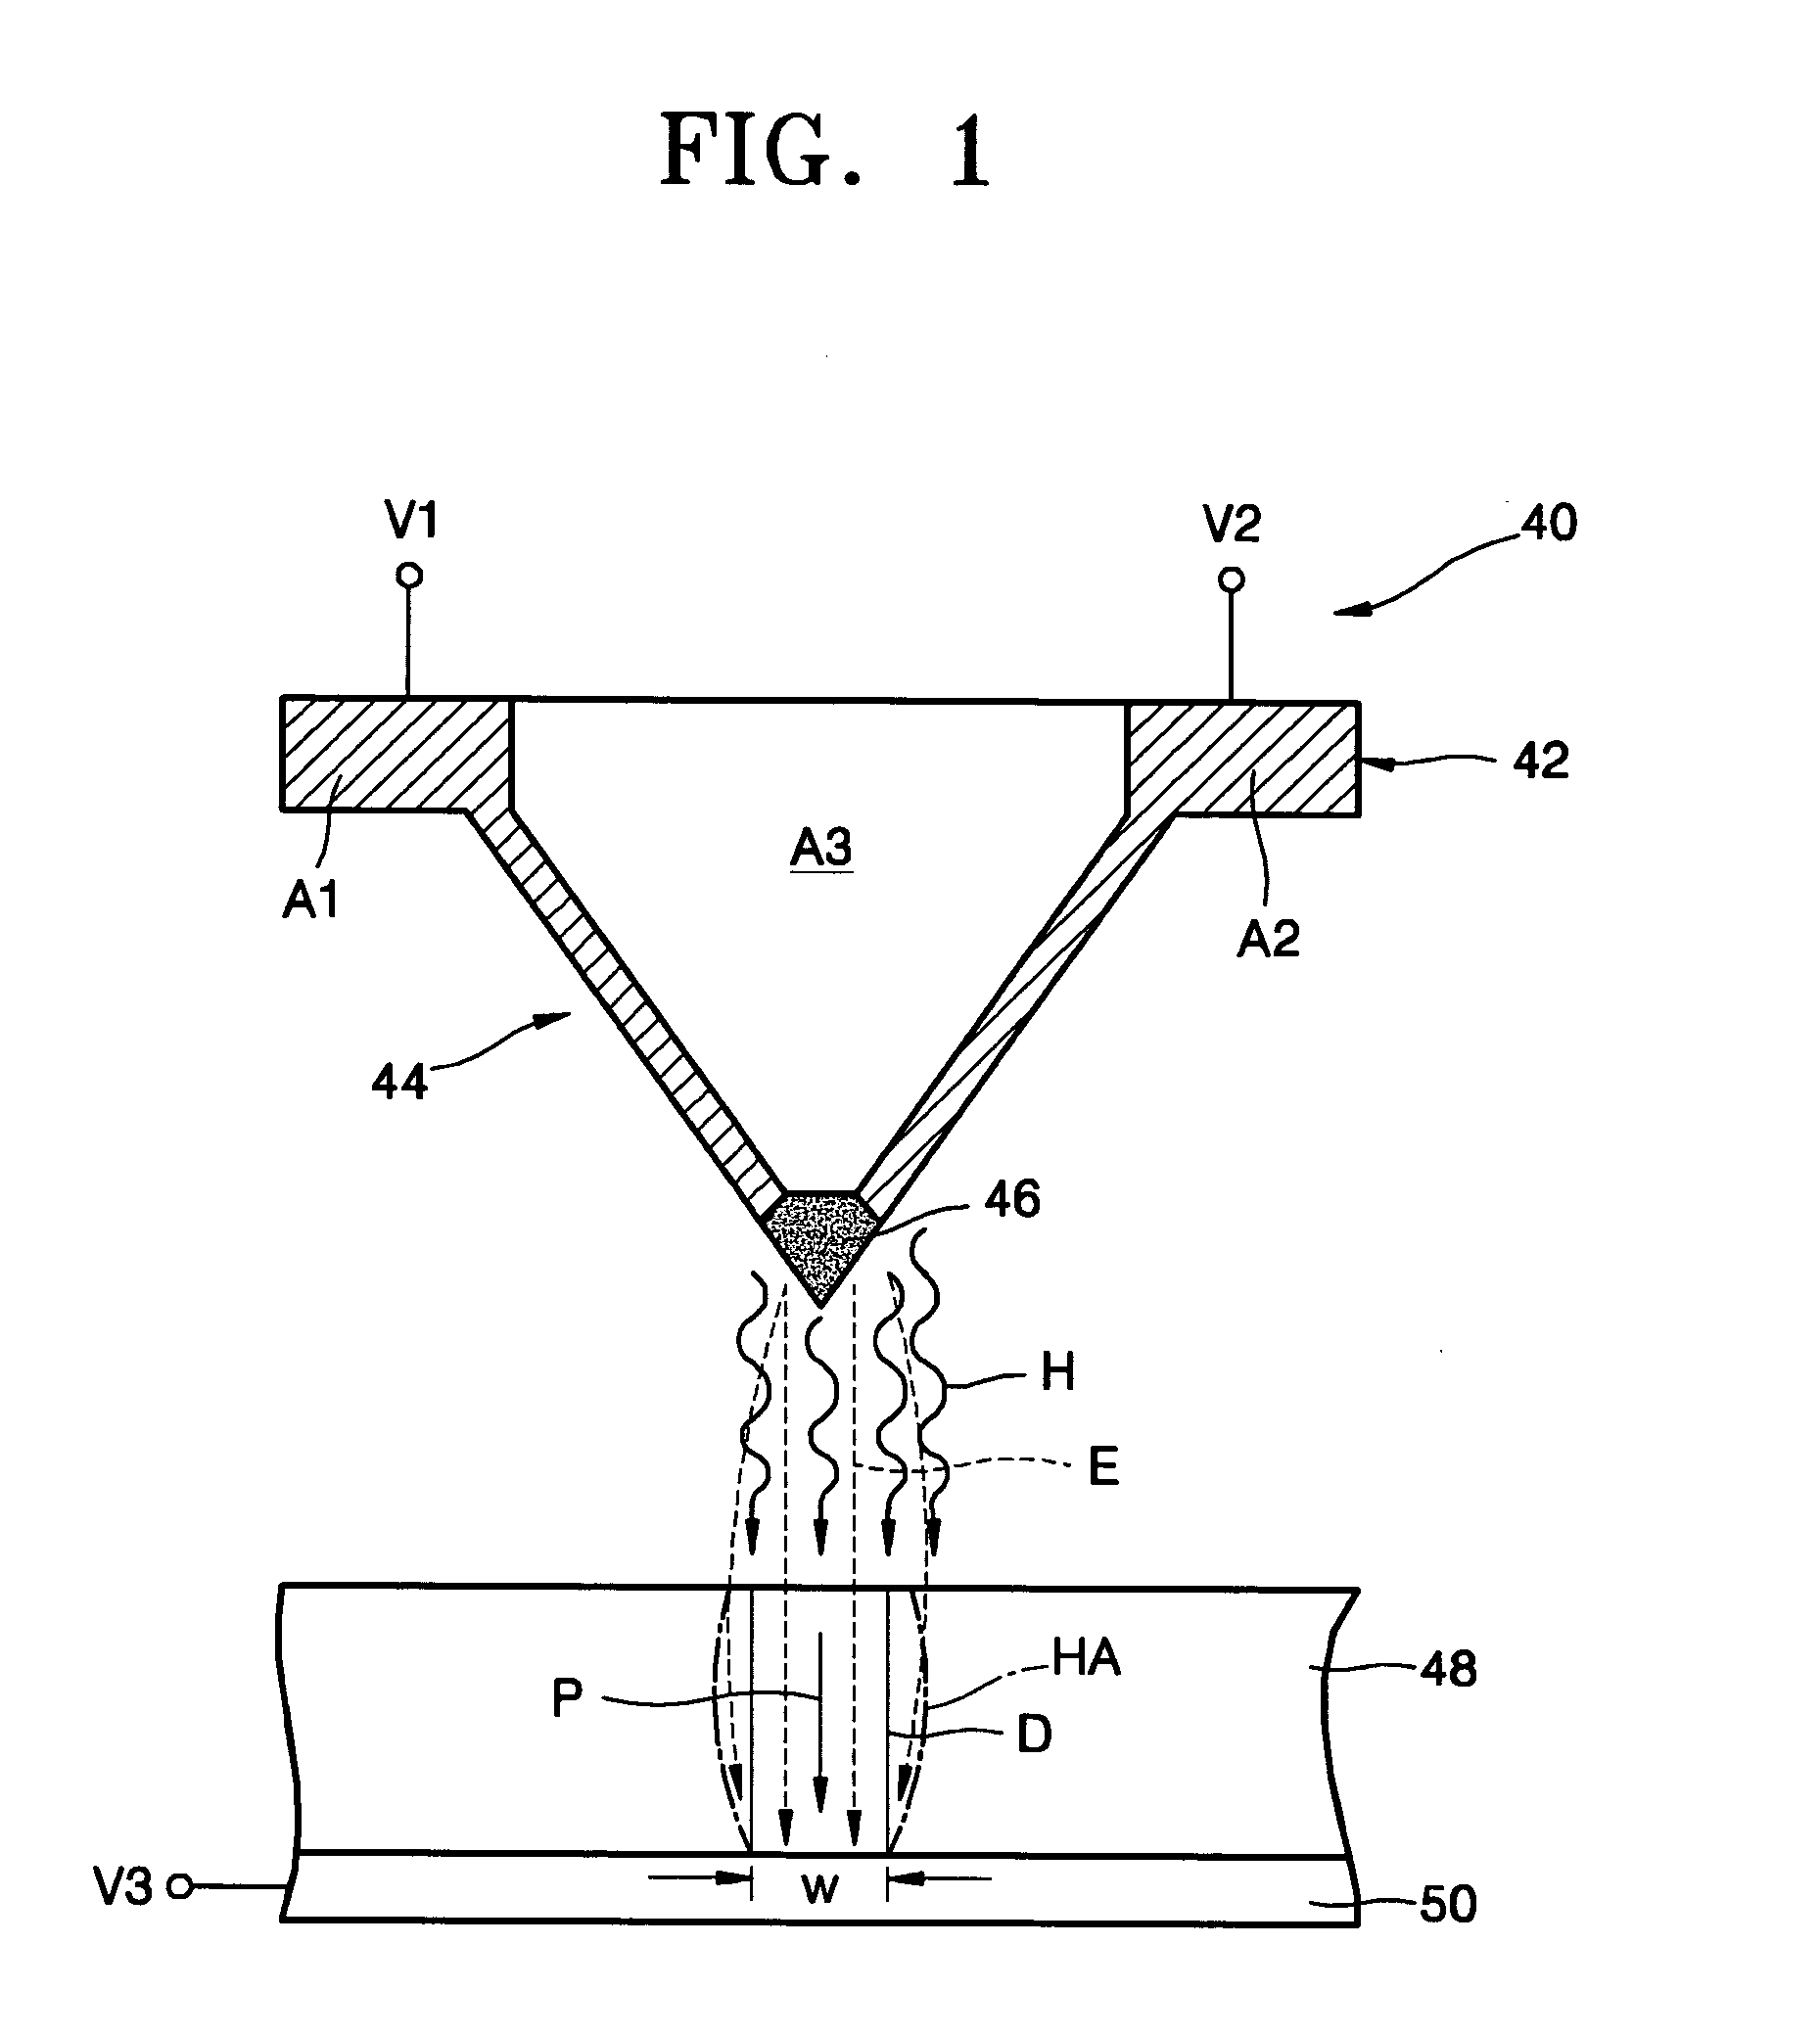 Method of writing data on a storage device using a probe technique